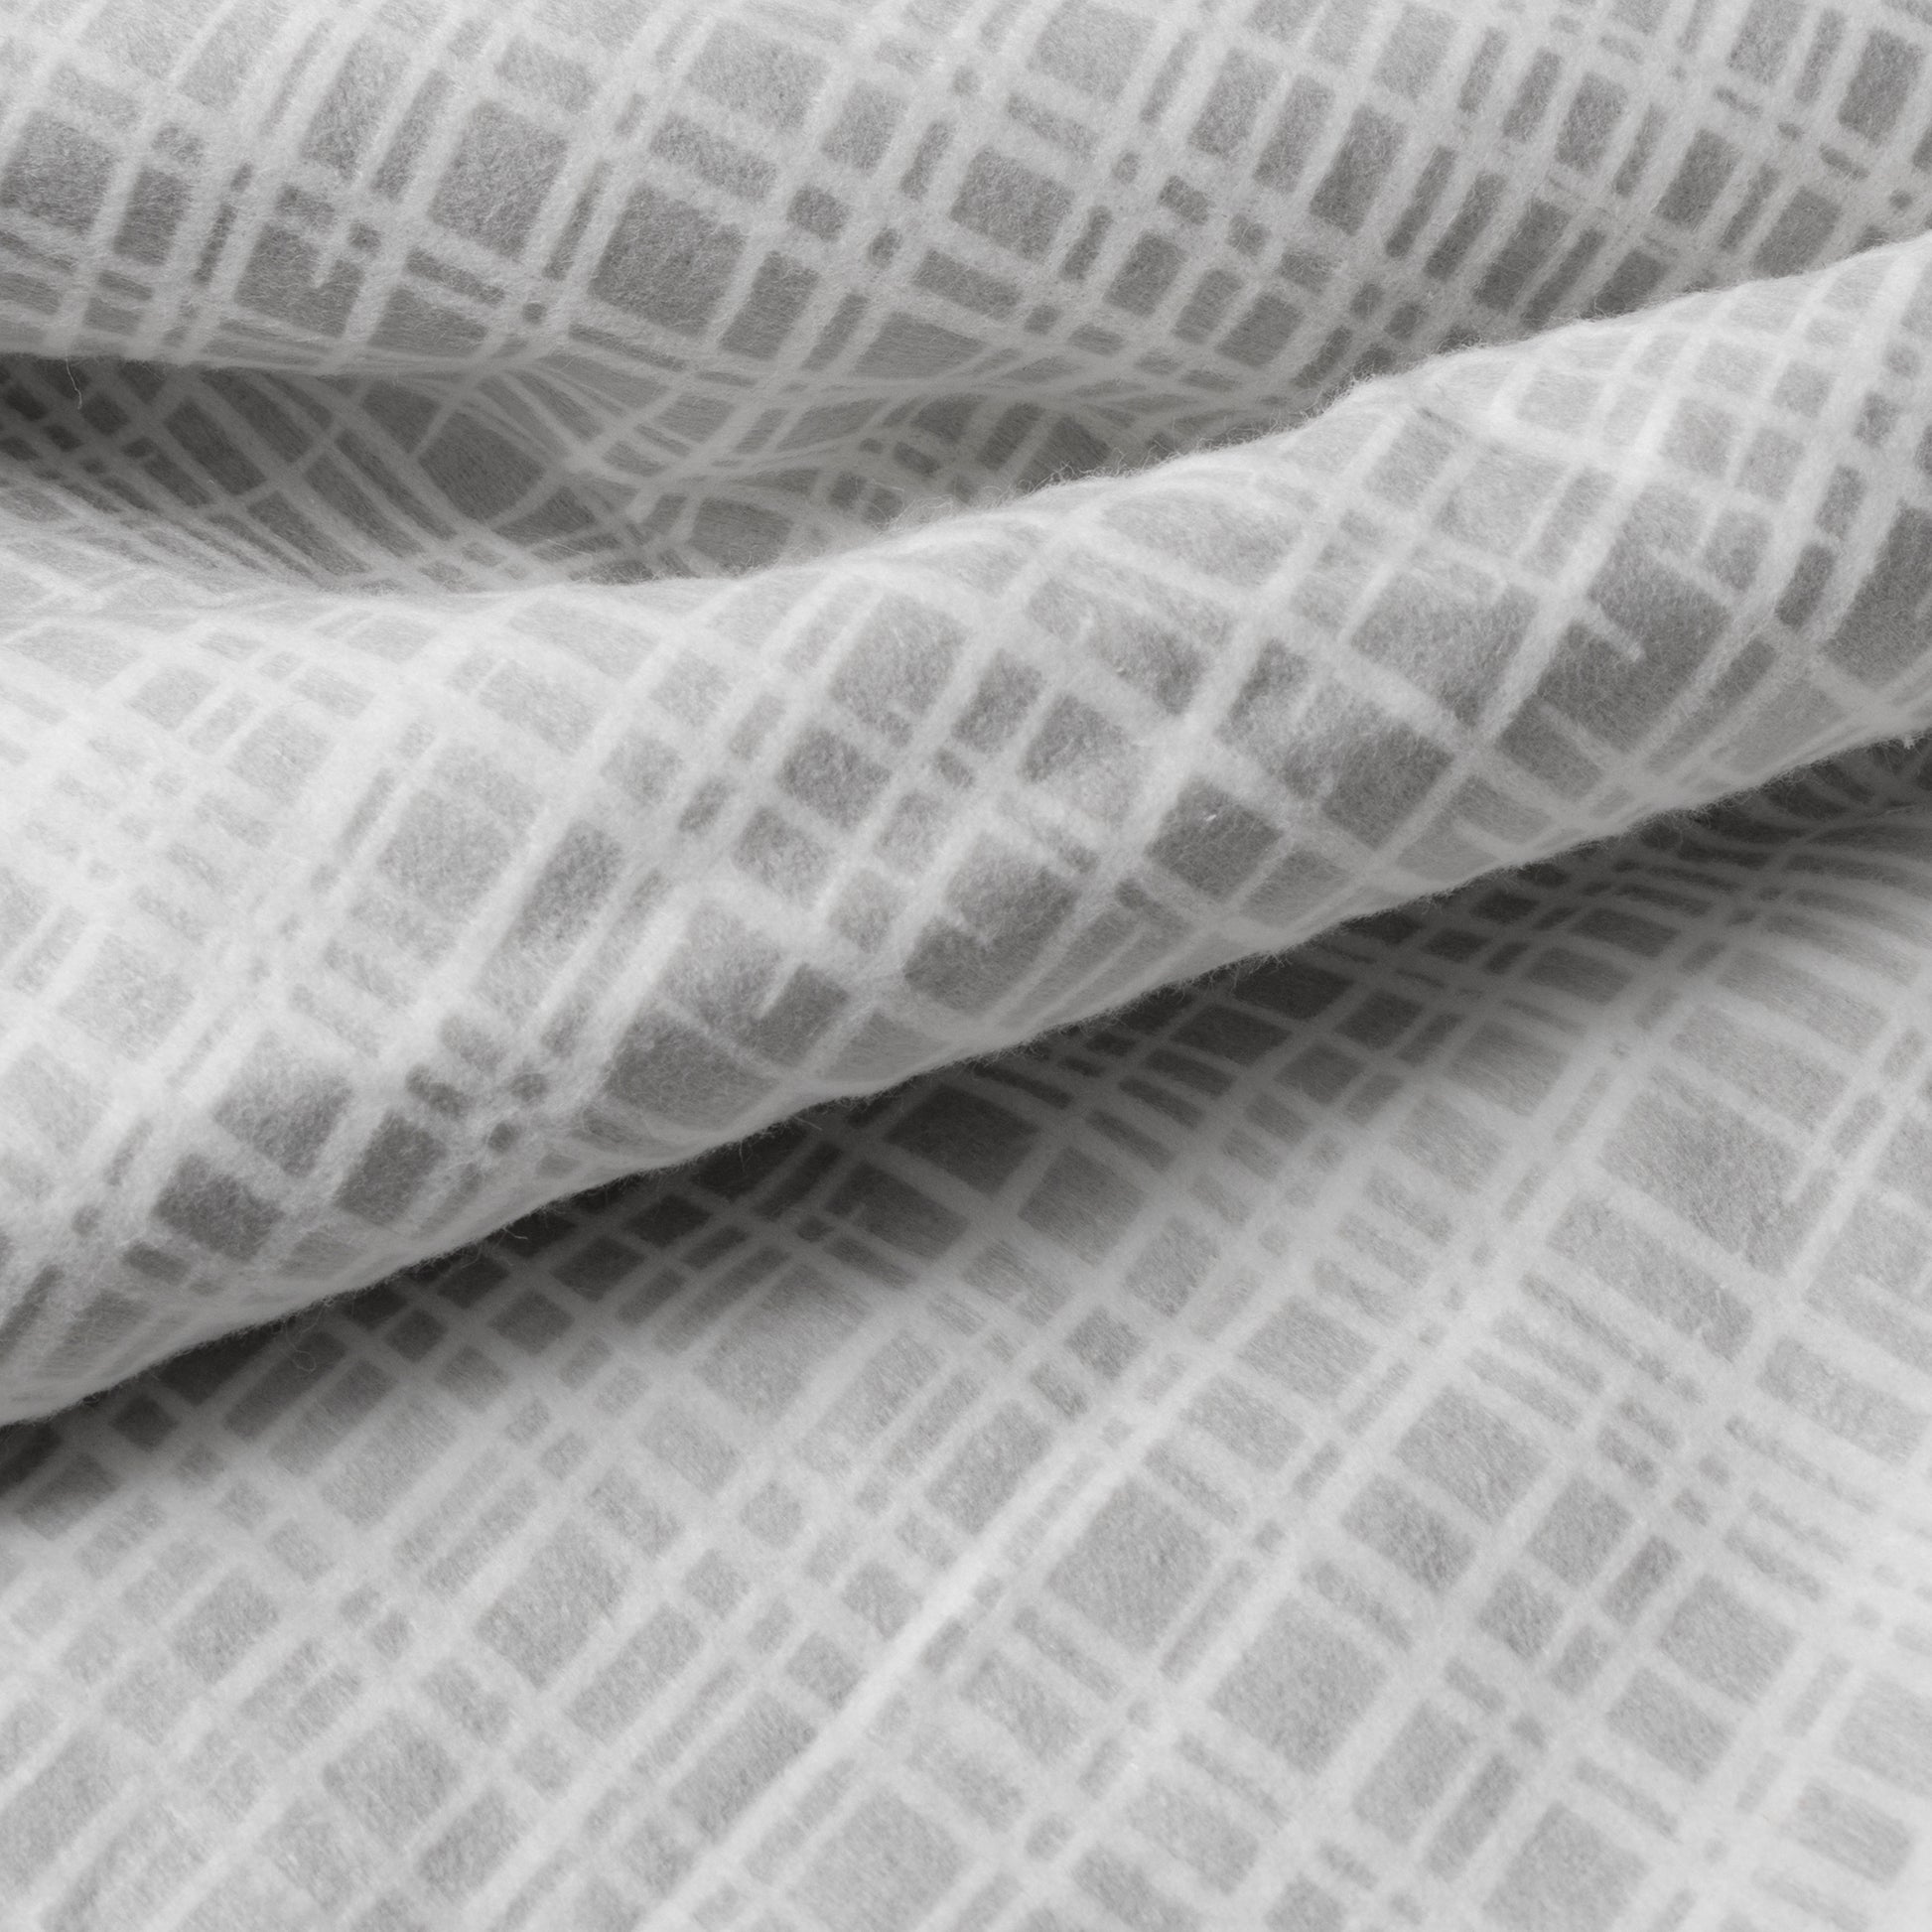  Criss Cross Deluxe Flannel Fitted Crib Sheet- flannel fabric details; Crib sheet fits a standard 28 in x 52 in crib mattress and features 10-inch-deep pockets with elastic surrounding the entire opening ensuring a more secure safer fit.